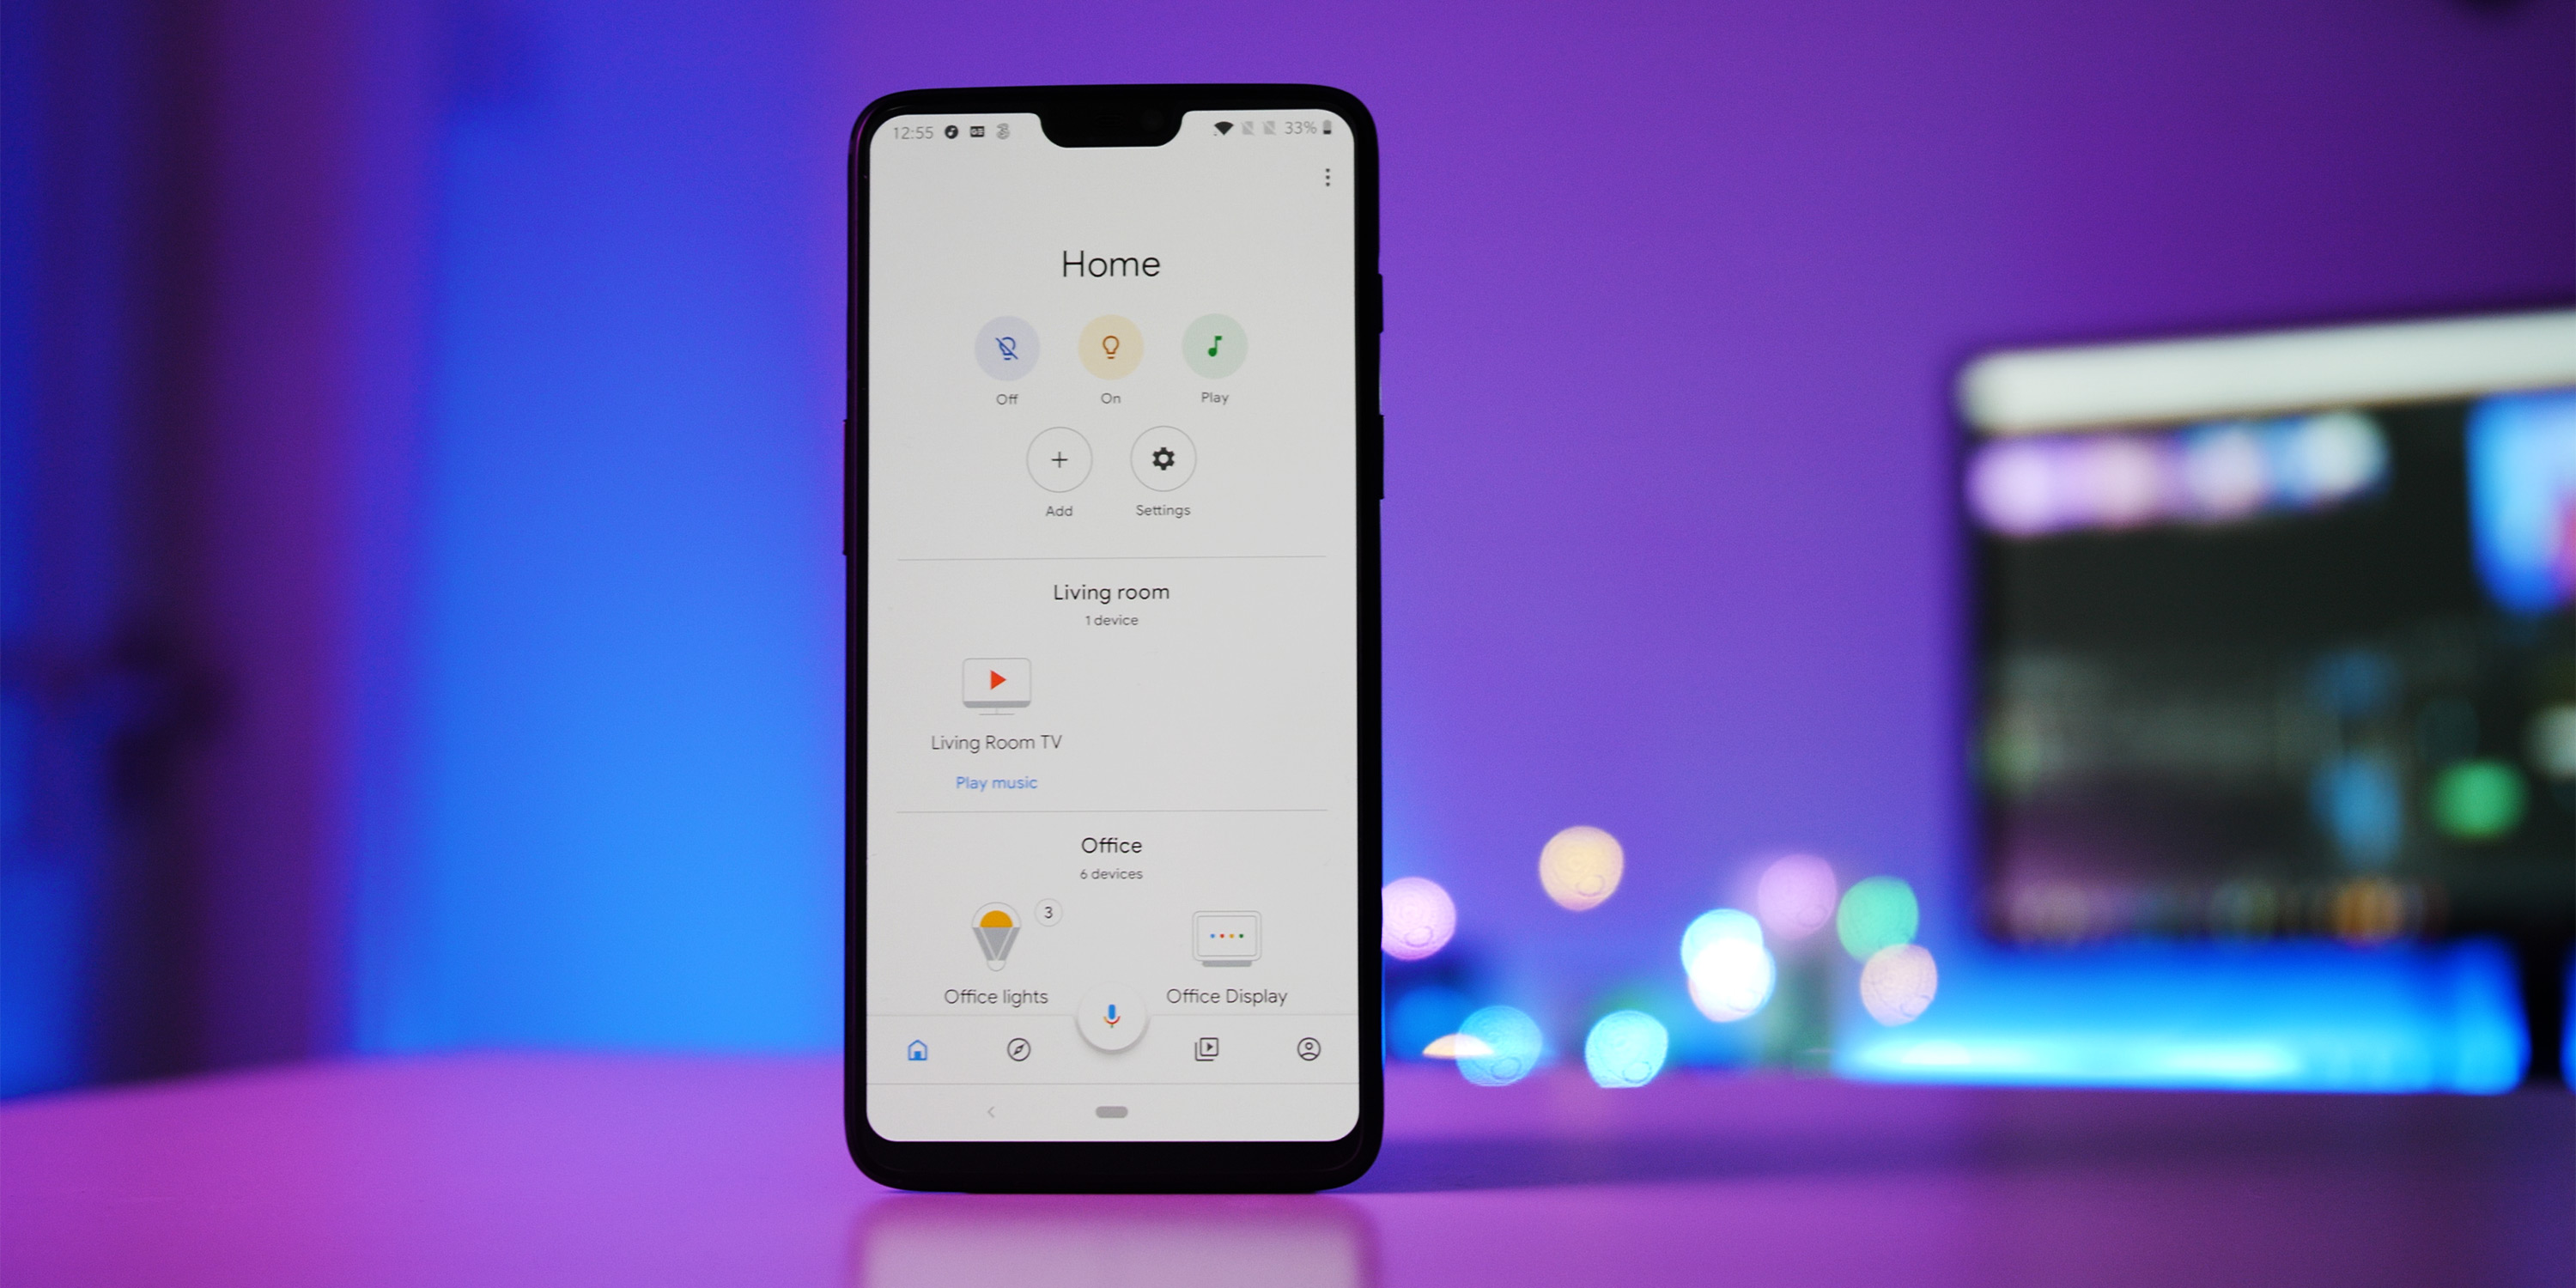 The new Google Home app finally goes 